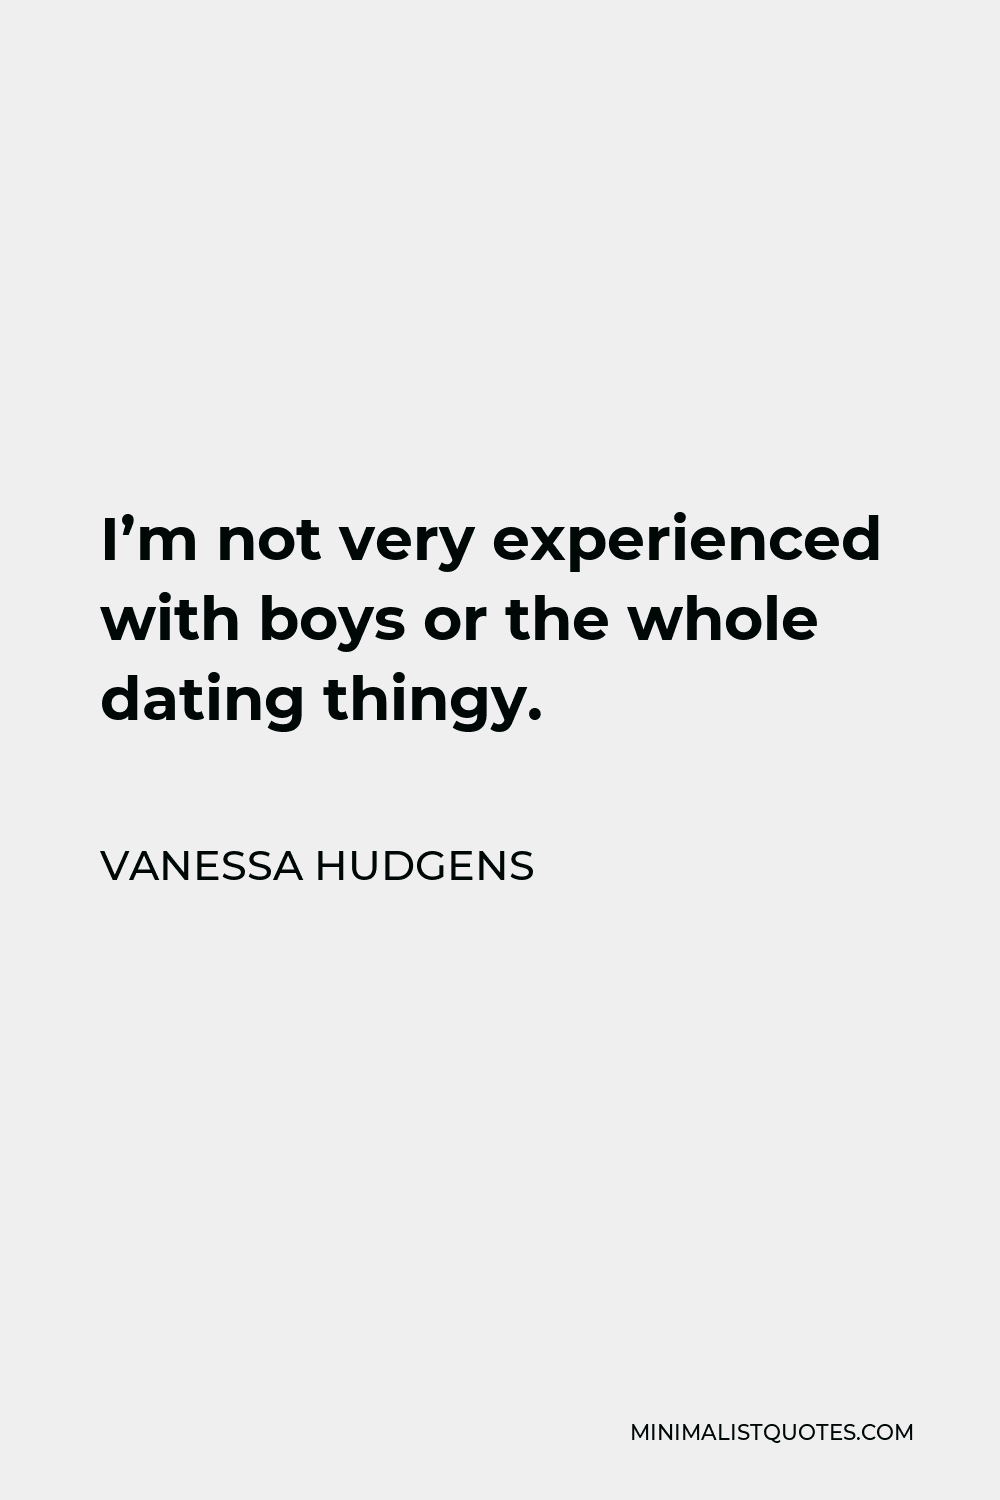 Vanessa Hudgens Quote - I’m not very experienced with boys or the whole dating thingy.